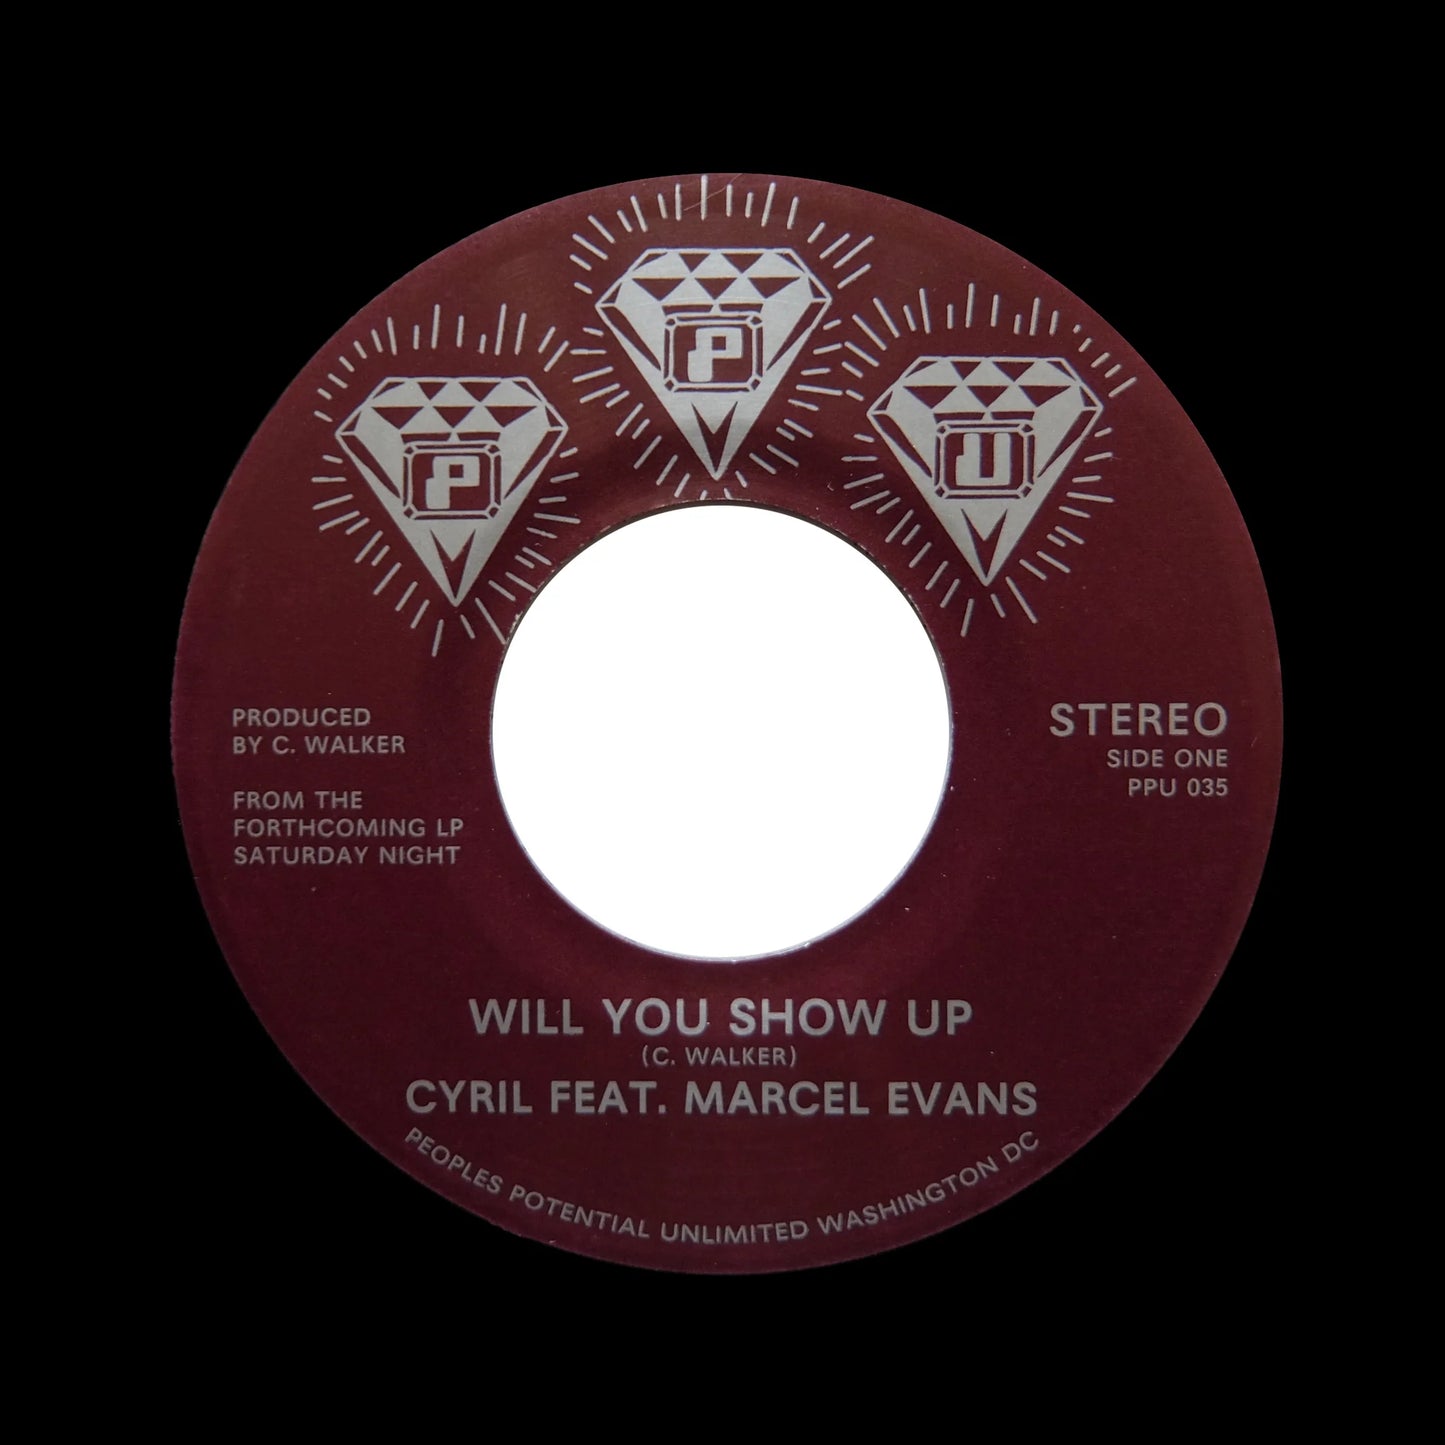 CYRIL FEAT. MARCEL EVANS & MILE HIGH PIE - WILL YOU SHOW UP(7)